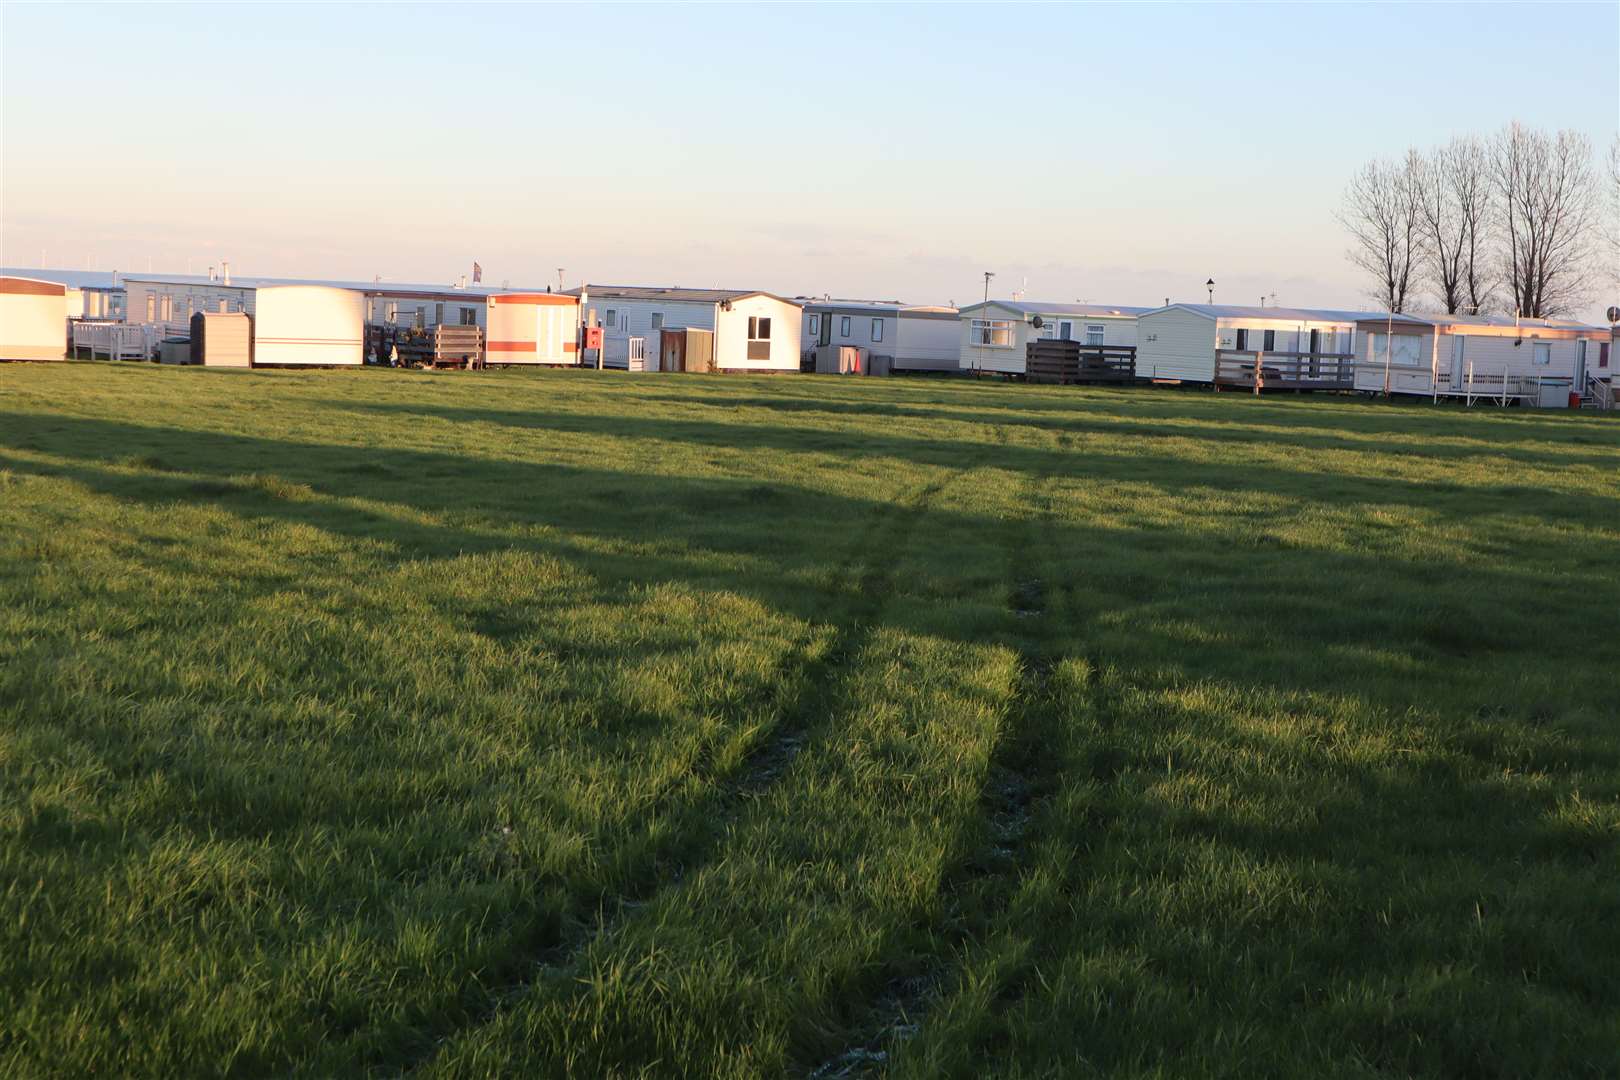 The football field at Nutts Farm caravan park at Leysdown, Sheppey, where former Liverpool and England footballer Jamie Redknapp played as a boy